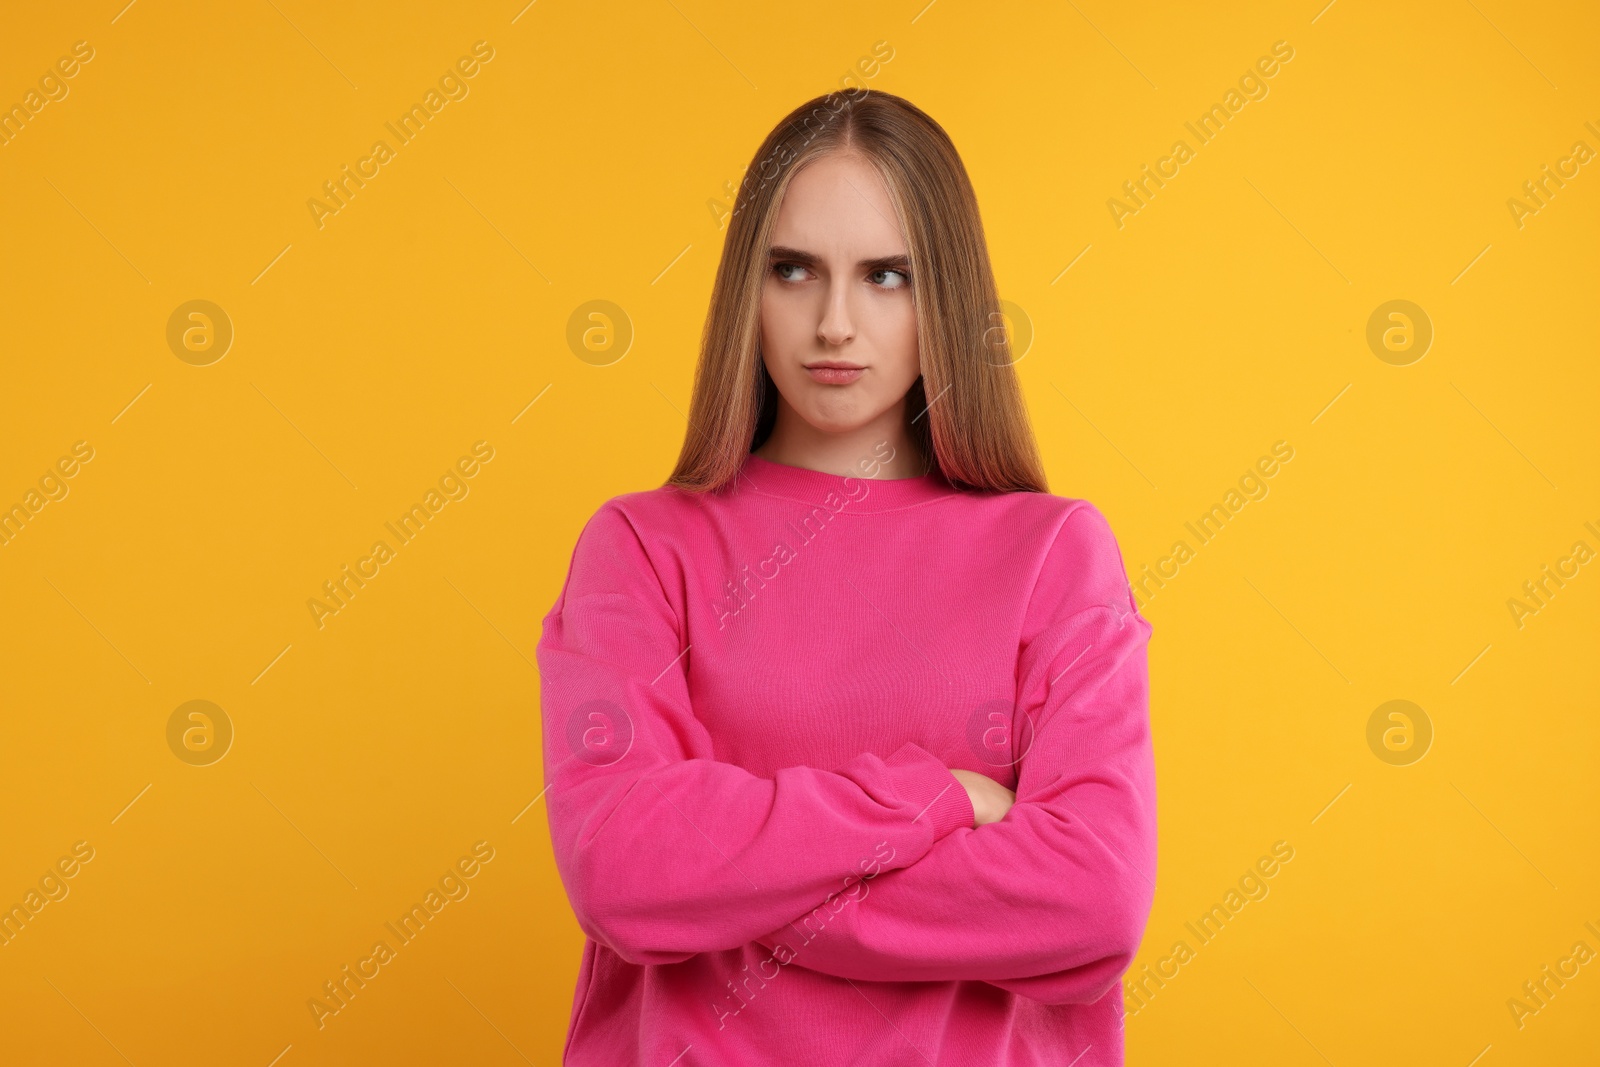 Photo of Resentful woman with crossed arms on orange background